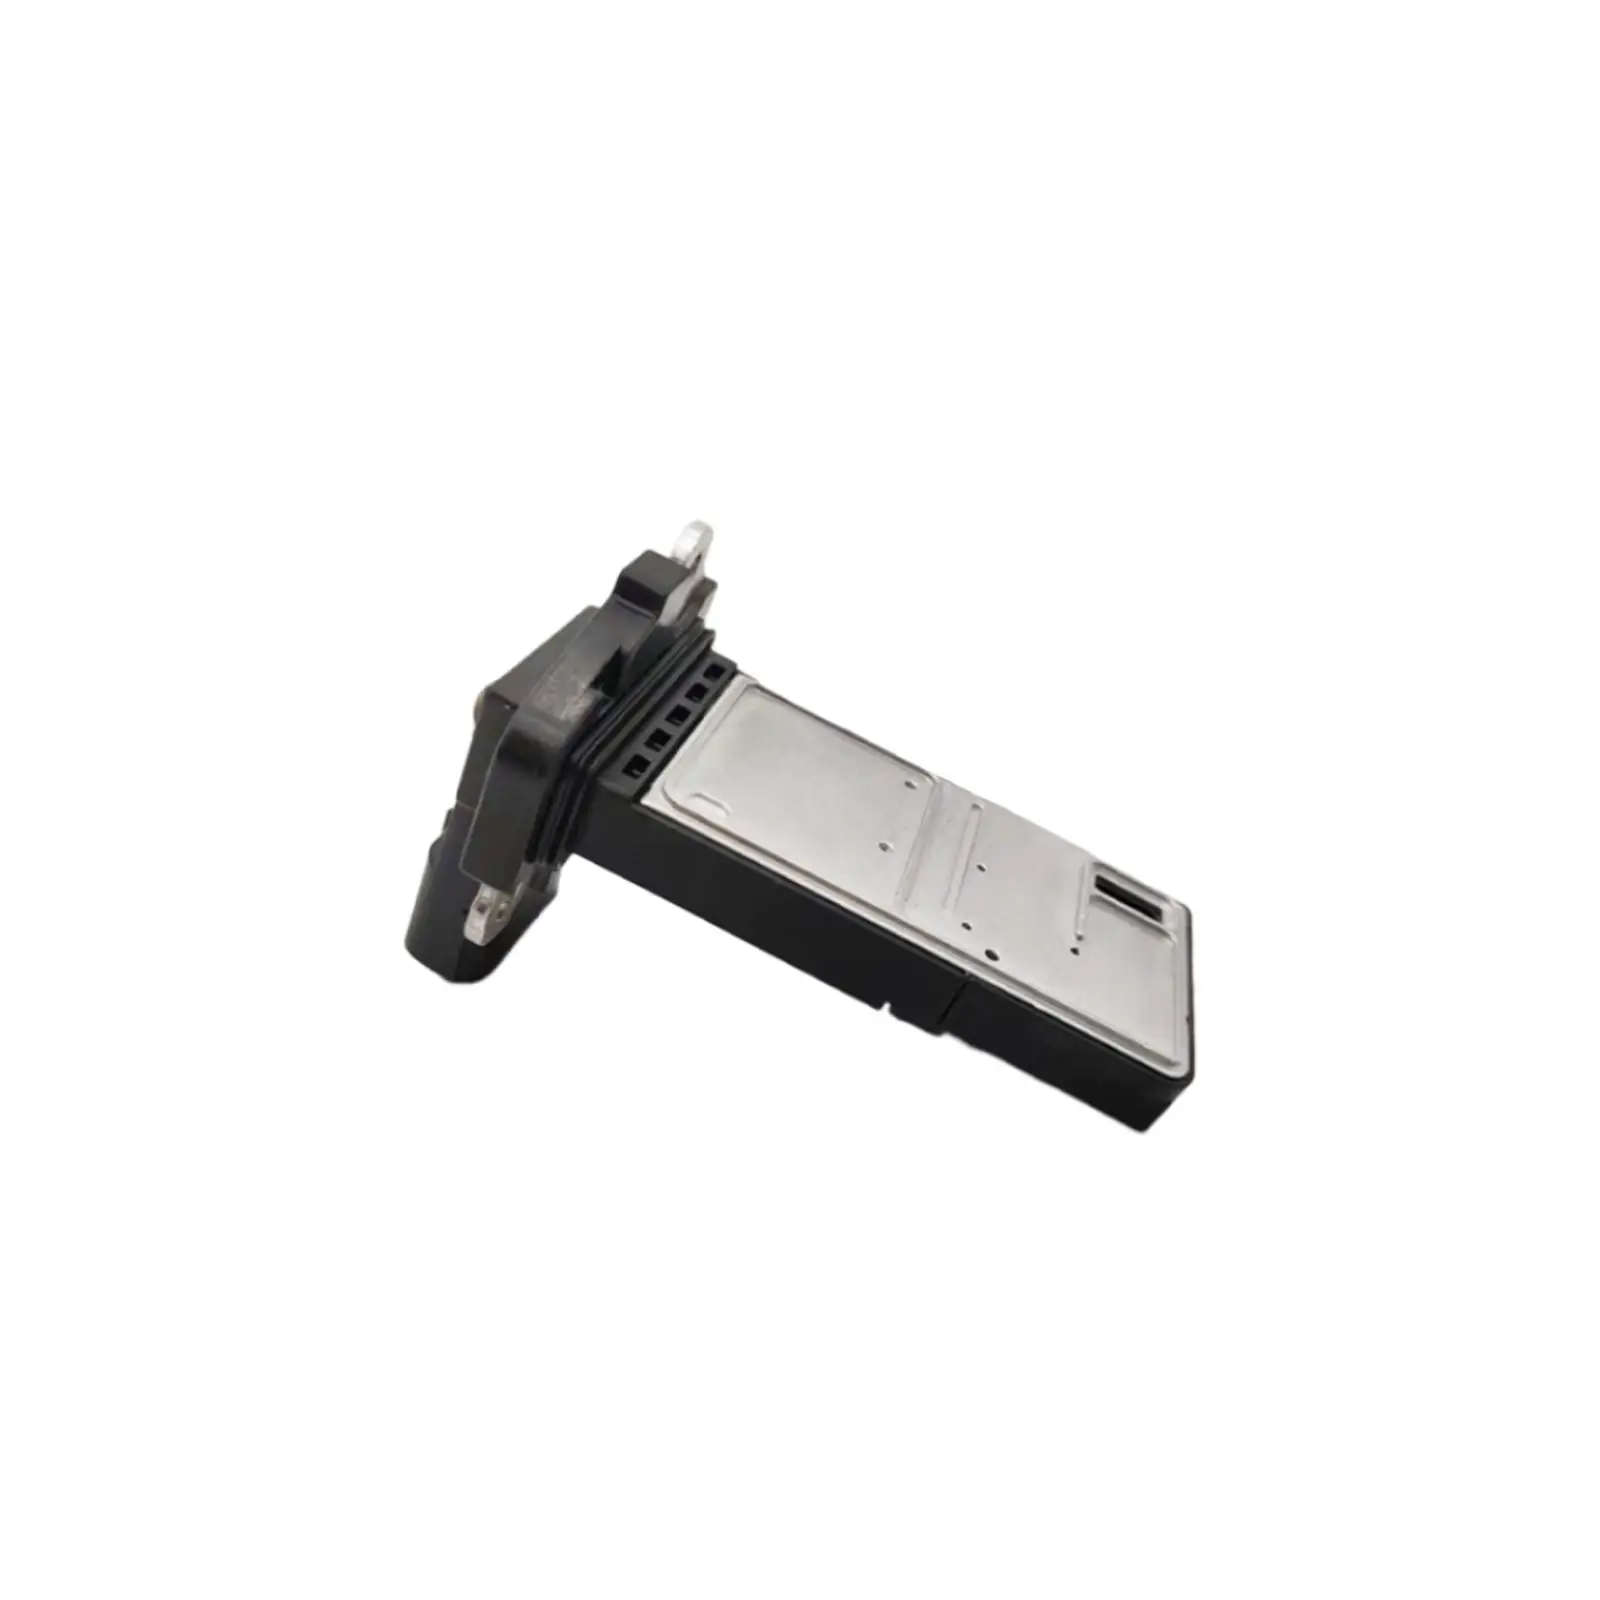 Mass Air Flow Sensor Meter Replaces 37980-rna-a01 Stable Performance Vehicle